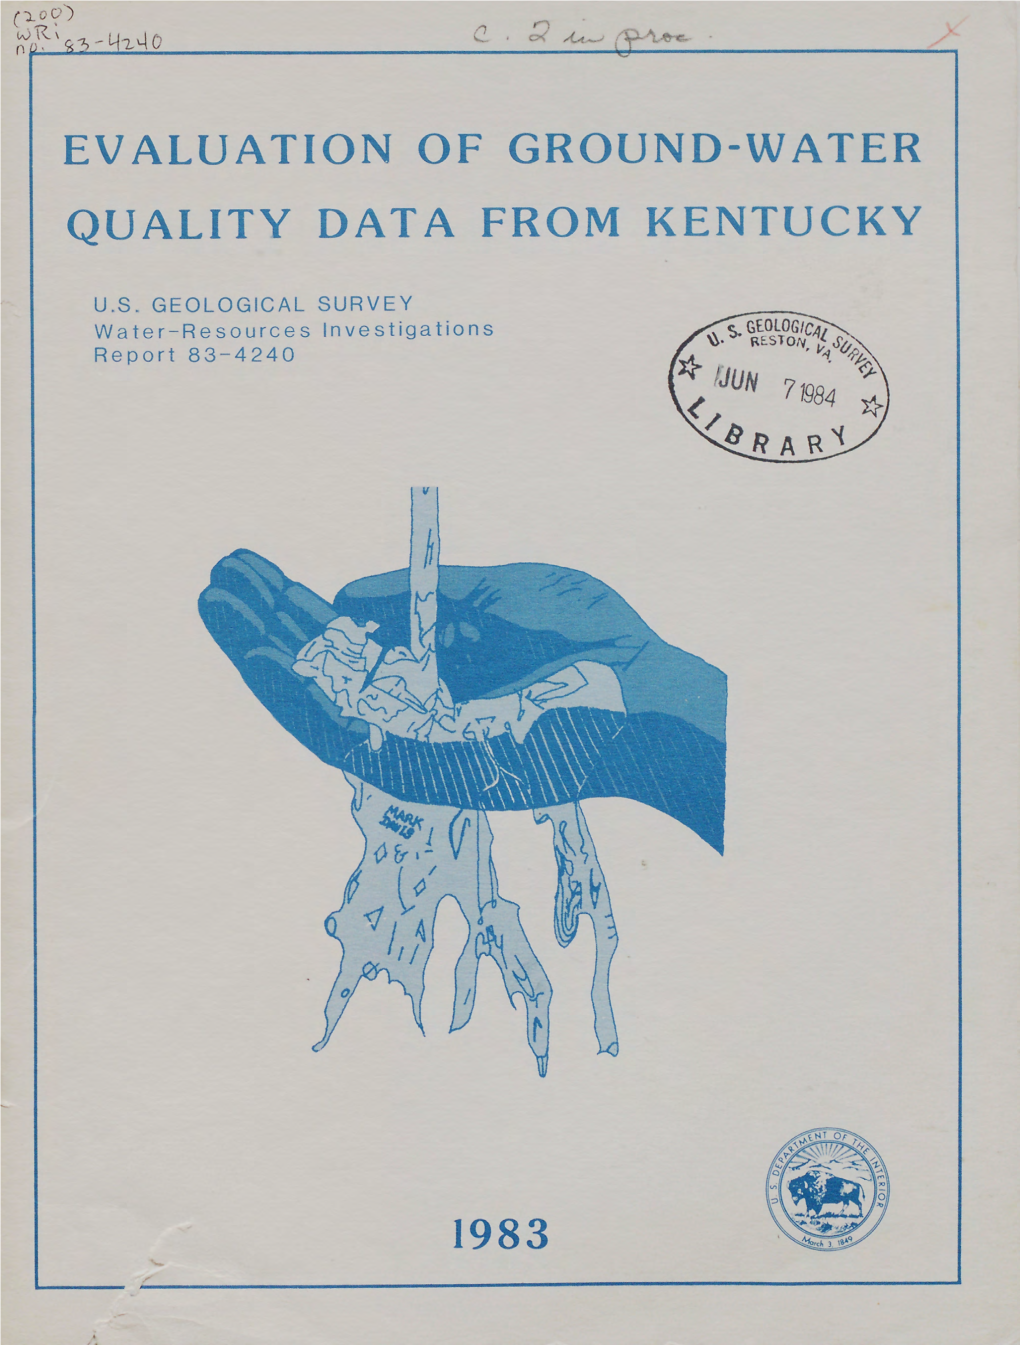 Evaluation of Ground-Water Quality Data from Kentucky